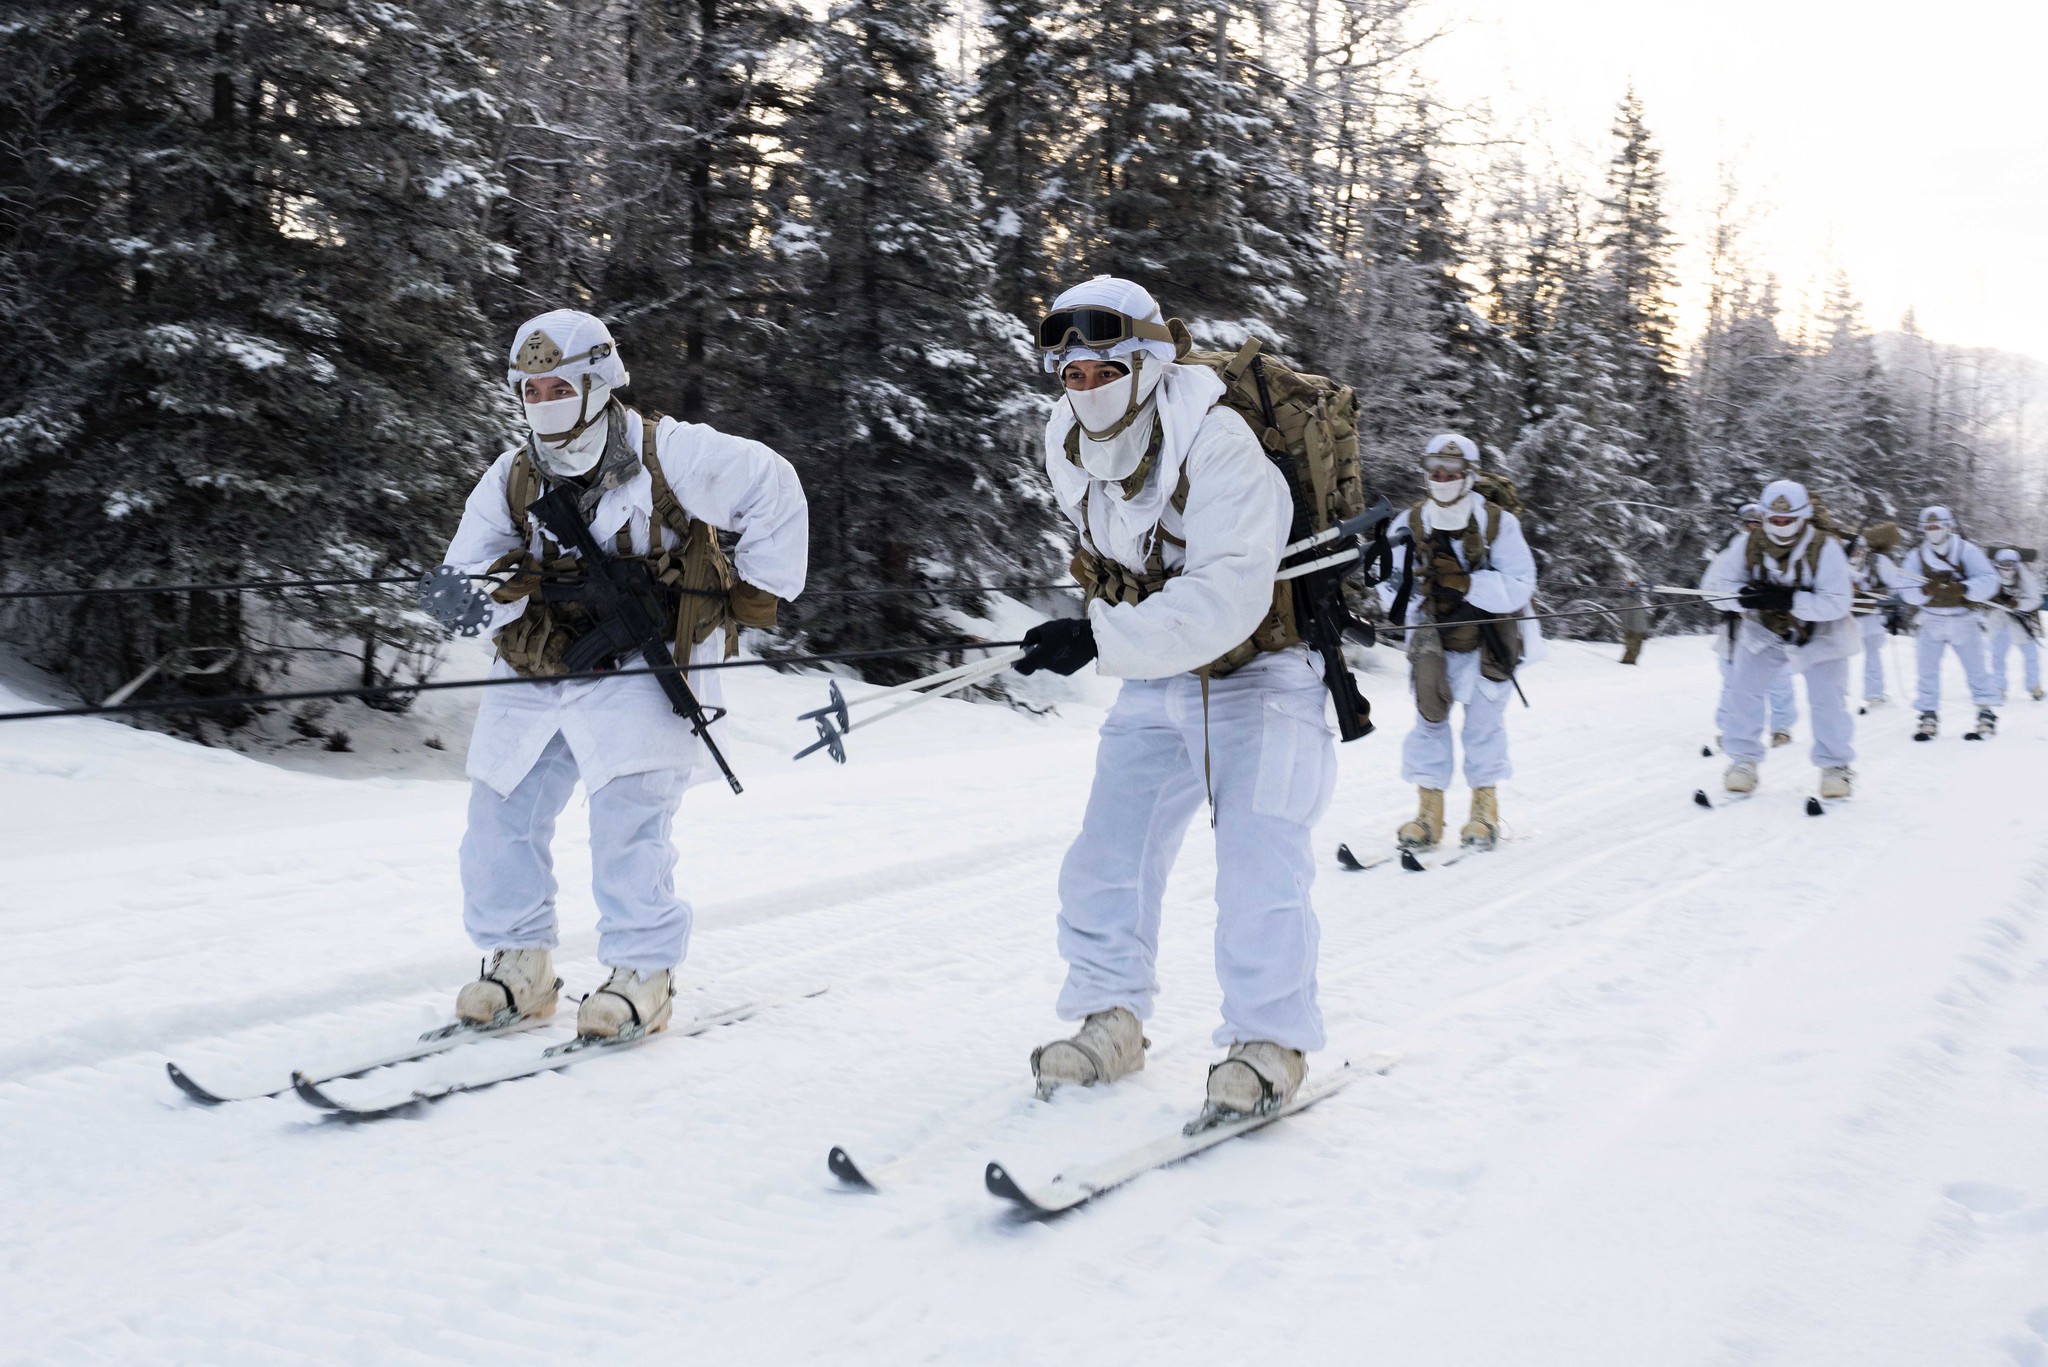 soldiers in white uniforms hold a tow rope. They are in bunny boots strapped to skis